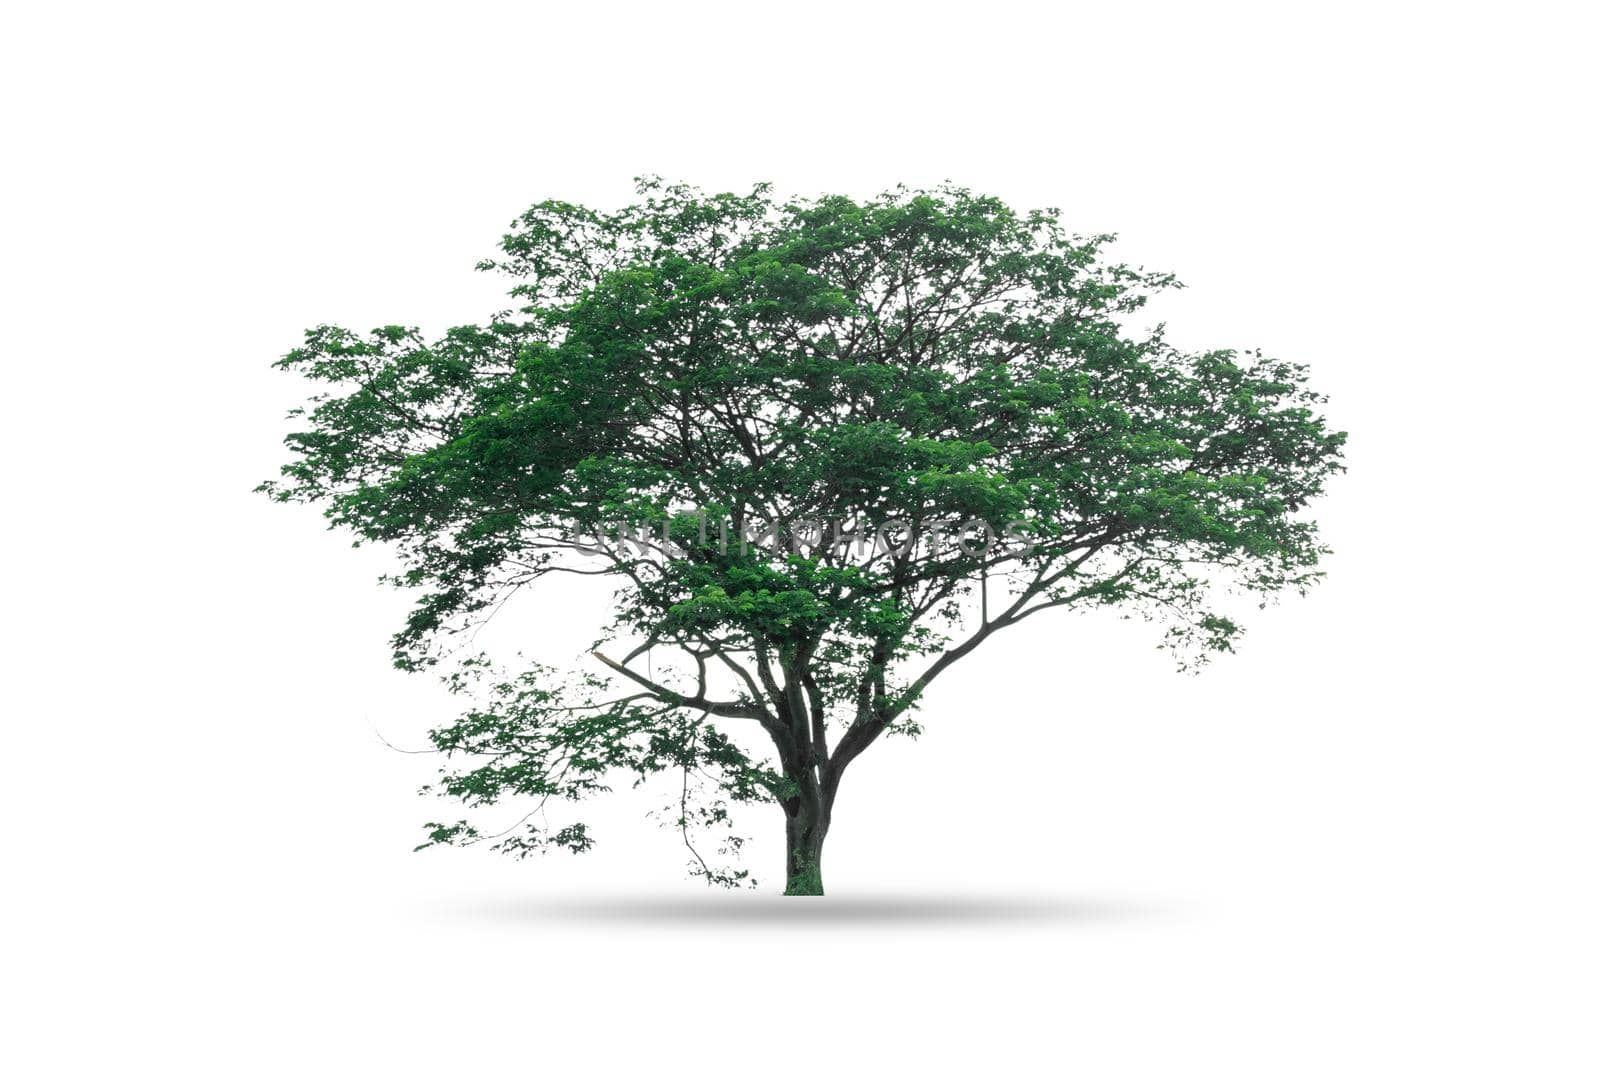 Tree isolated on white background by wattanaphob